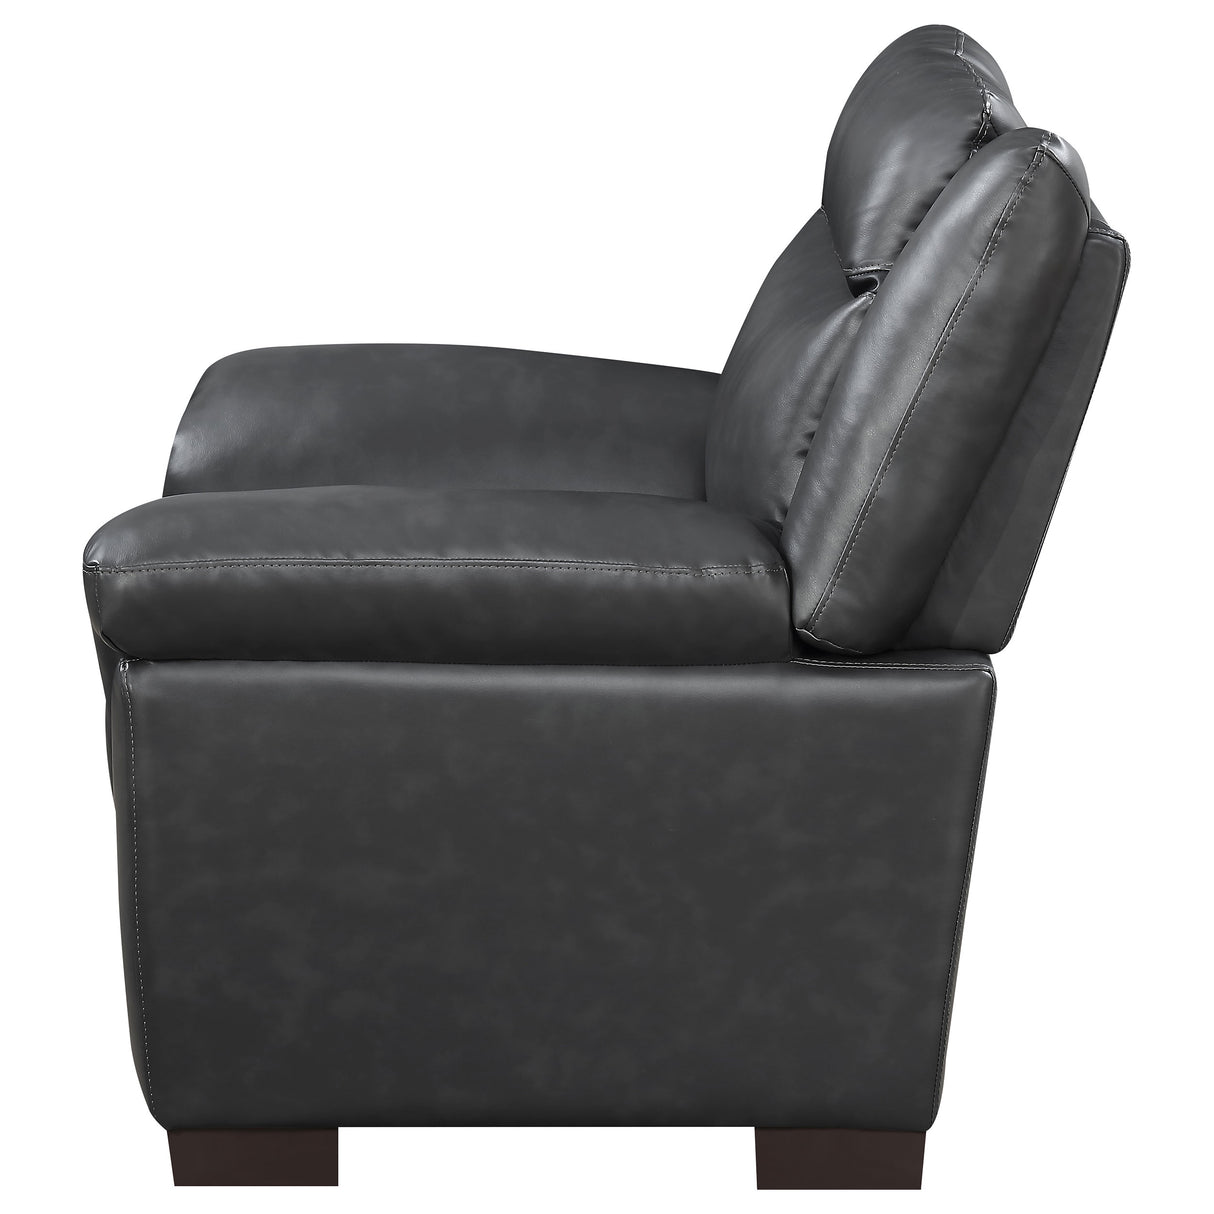 Chair - Arabella Pillow Top Upholstered Chair Grey